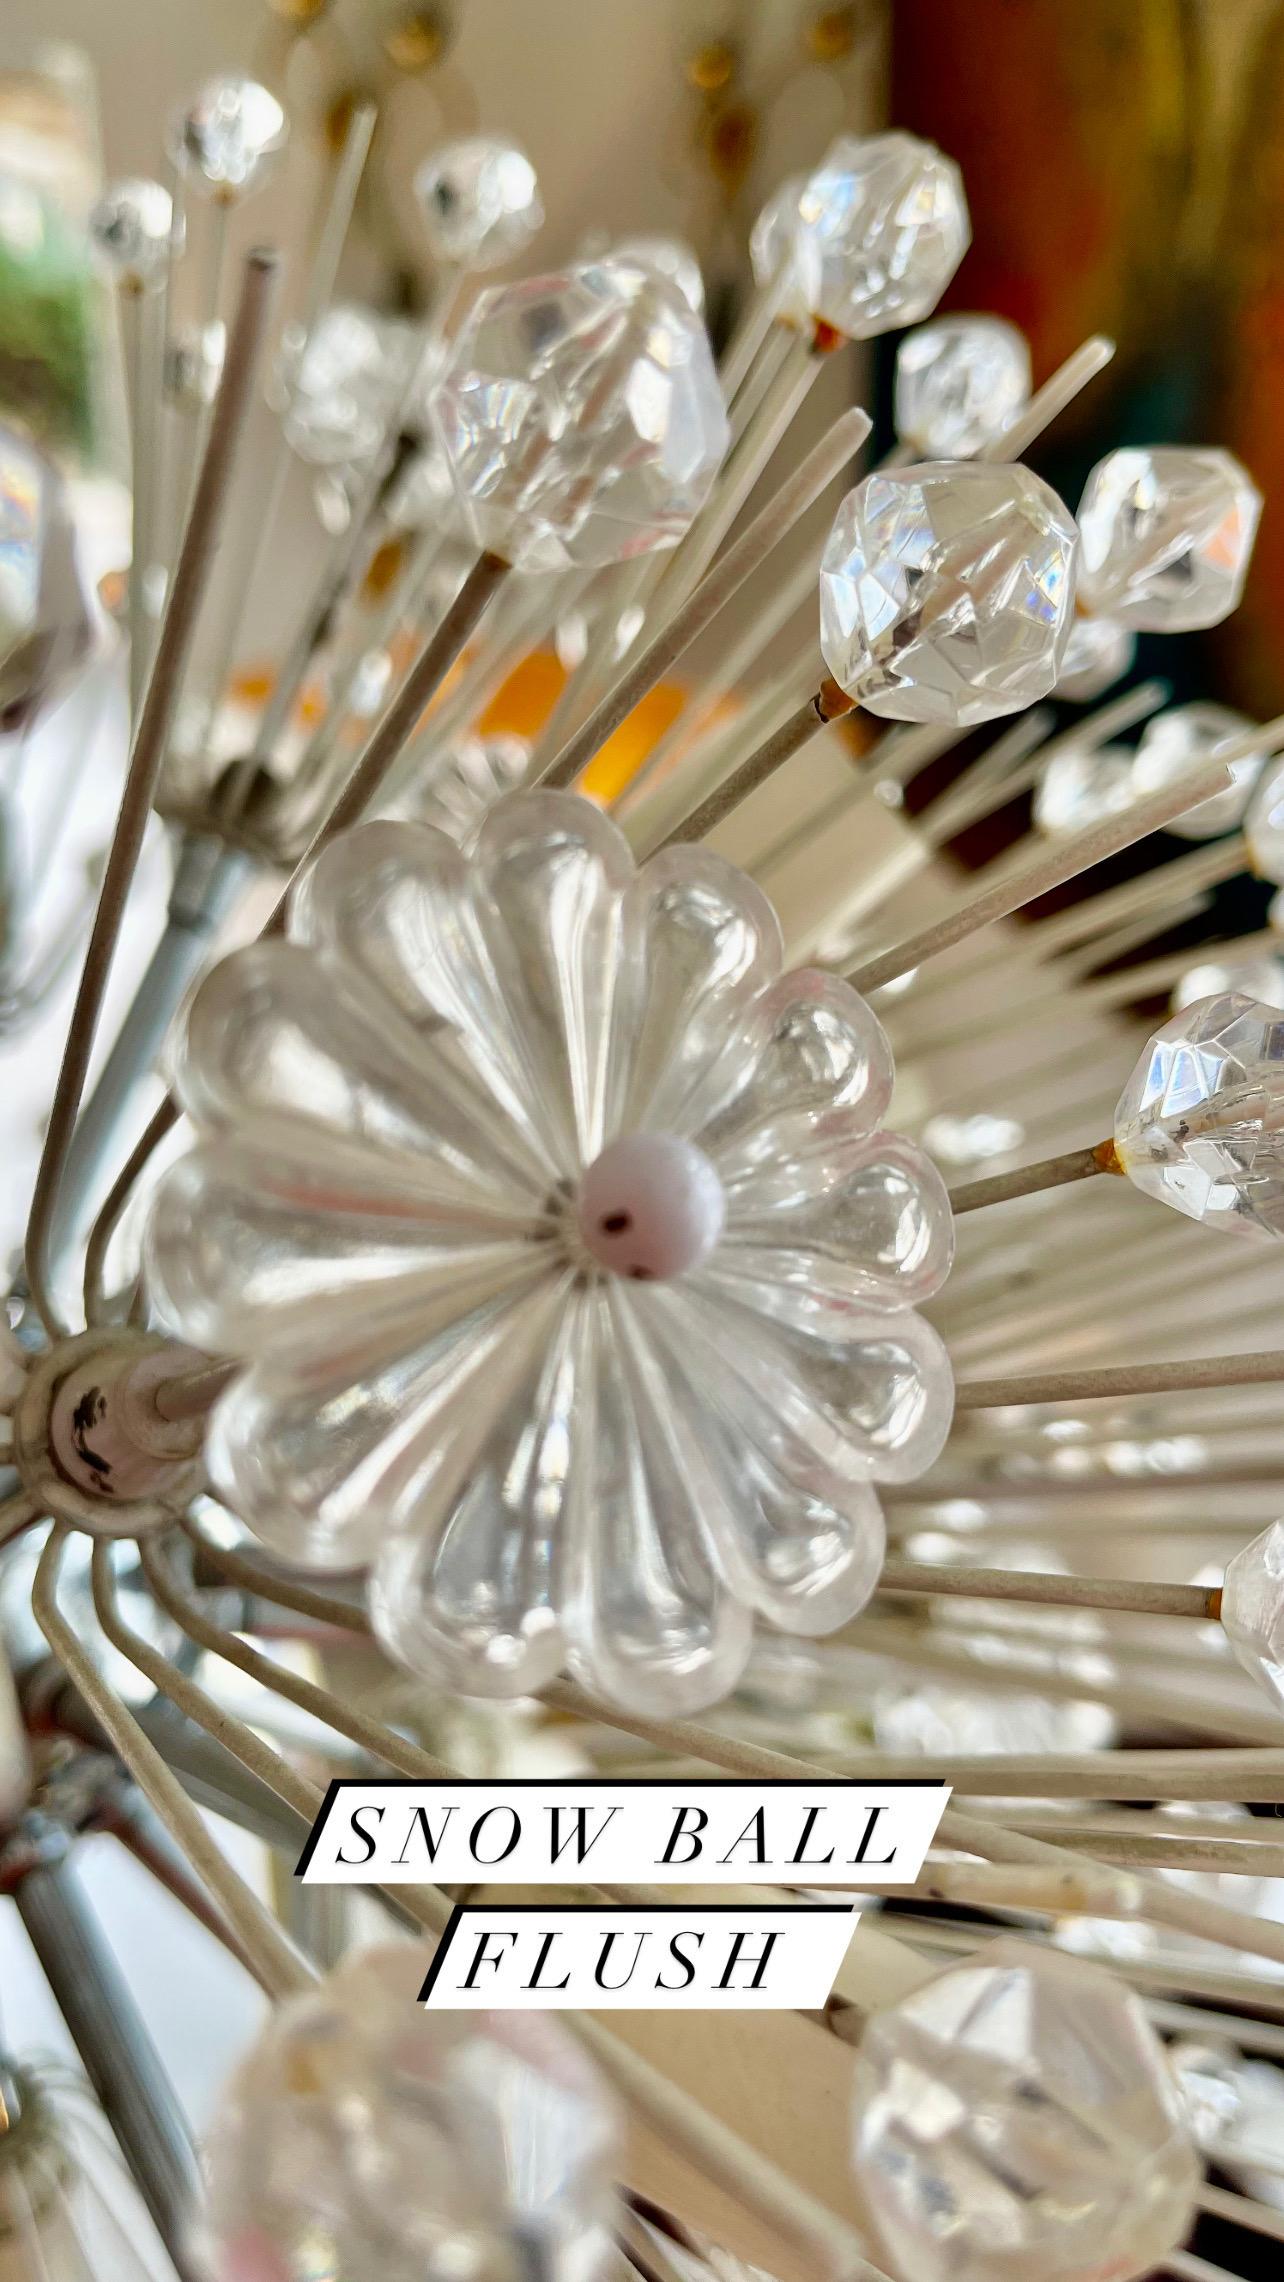 Exceptional large star chrome chandelier with hundreds of lucite crystals designed by Emil Stejnar for Nikoll, made in Austria, circa 1960s.

High Quality and in good condition with small signs of age. Cleaned, well wired and ready to use. The